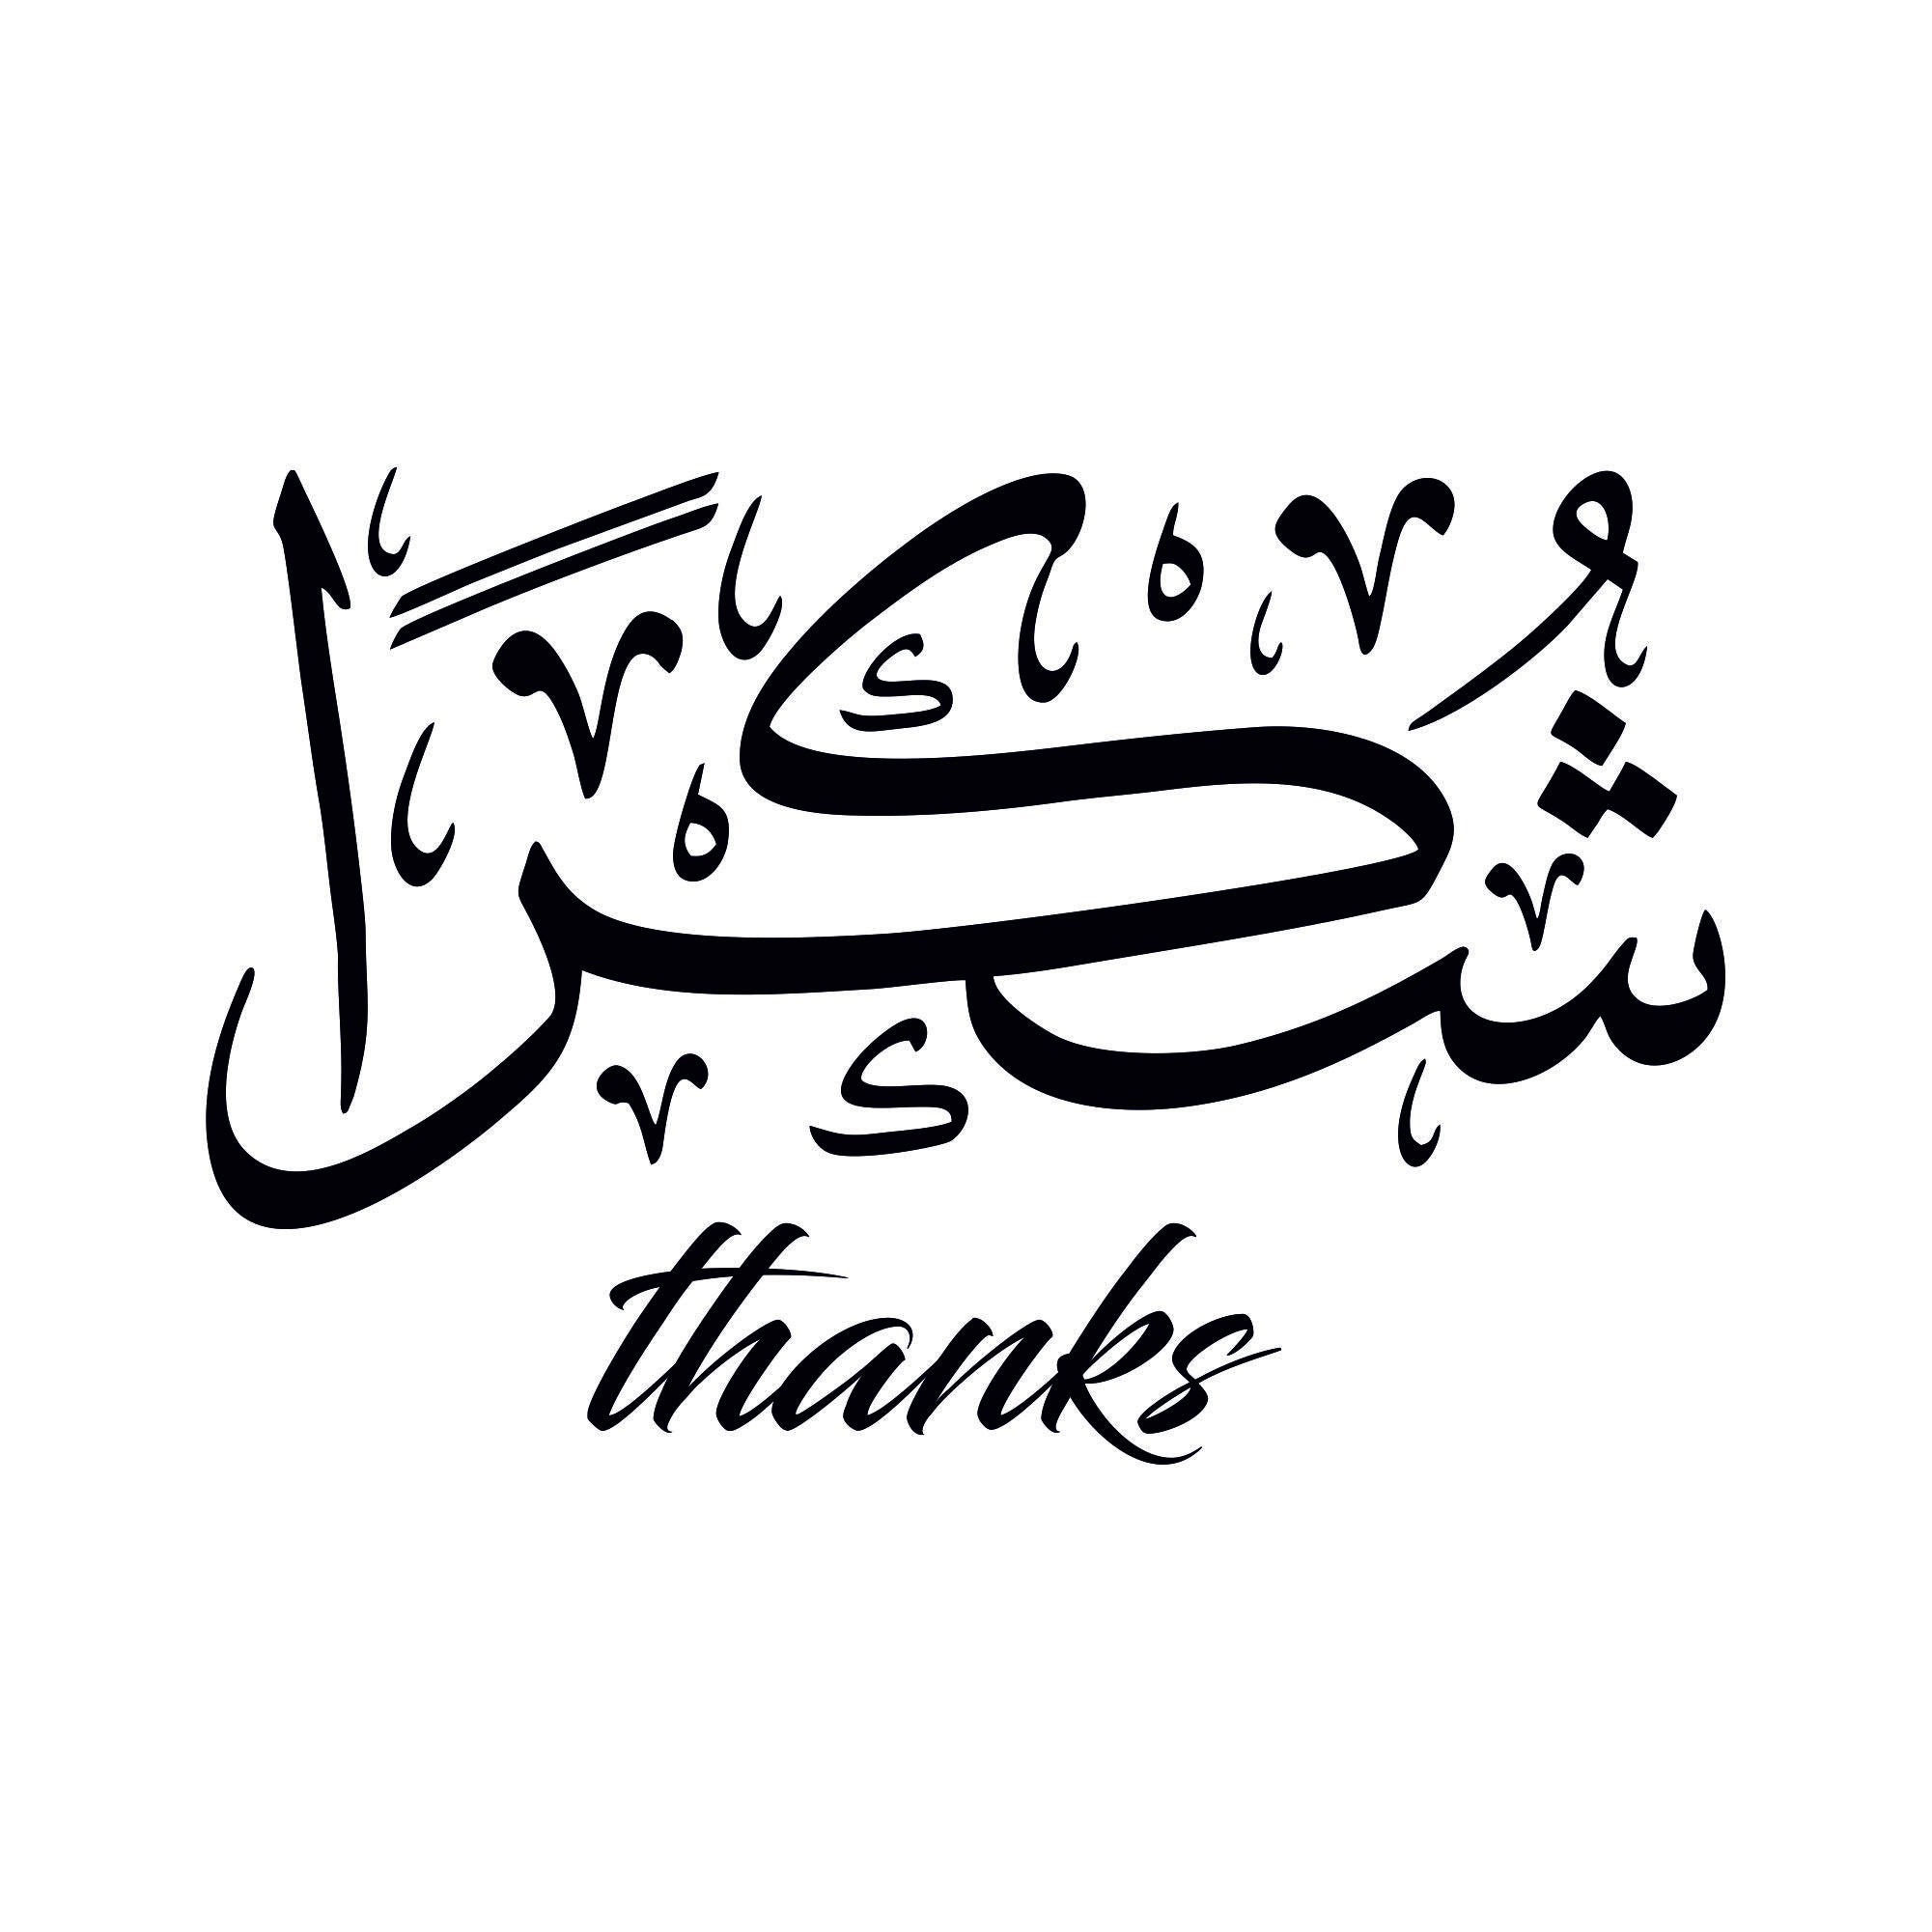 Shukran Thanks In Arabic Downloadable Svg File For Use On - Etsy